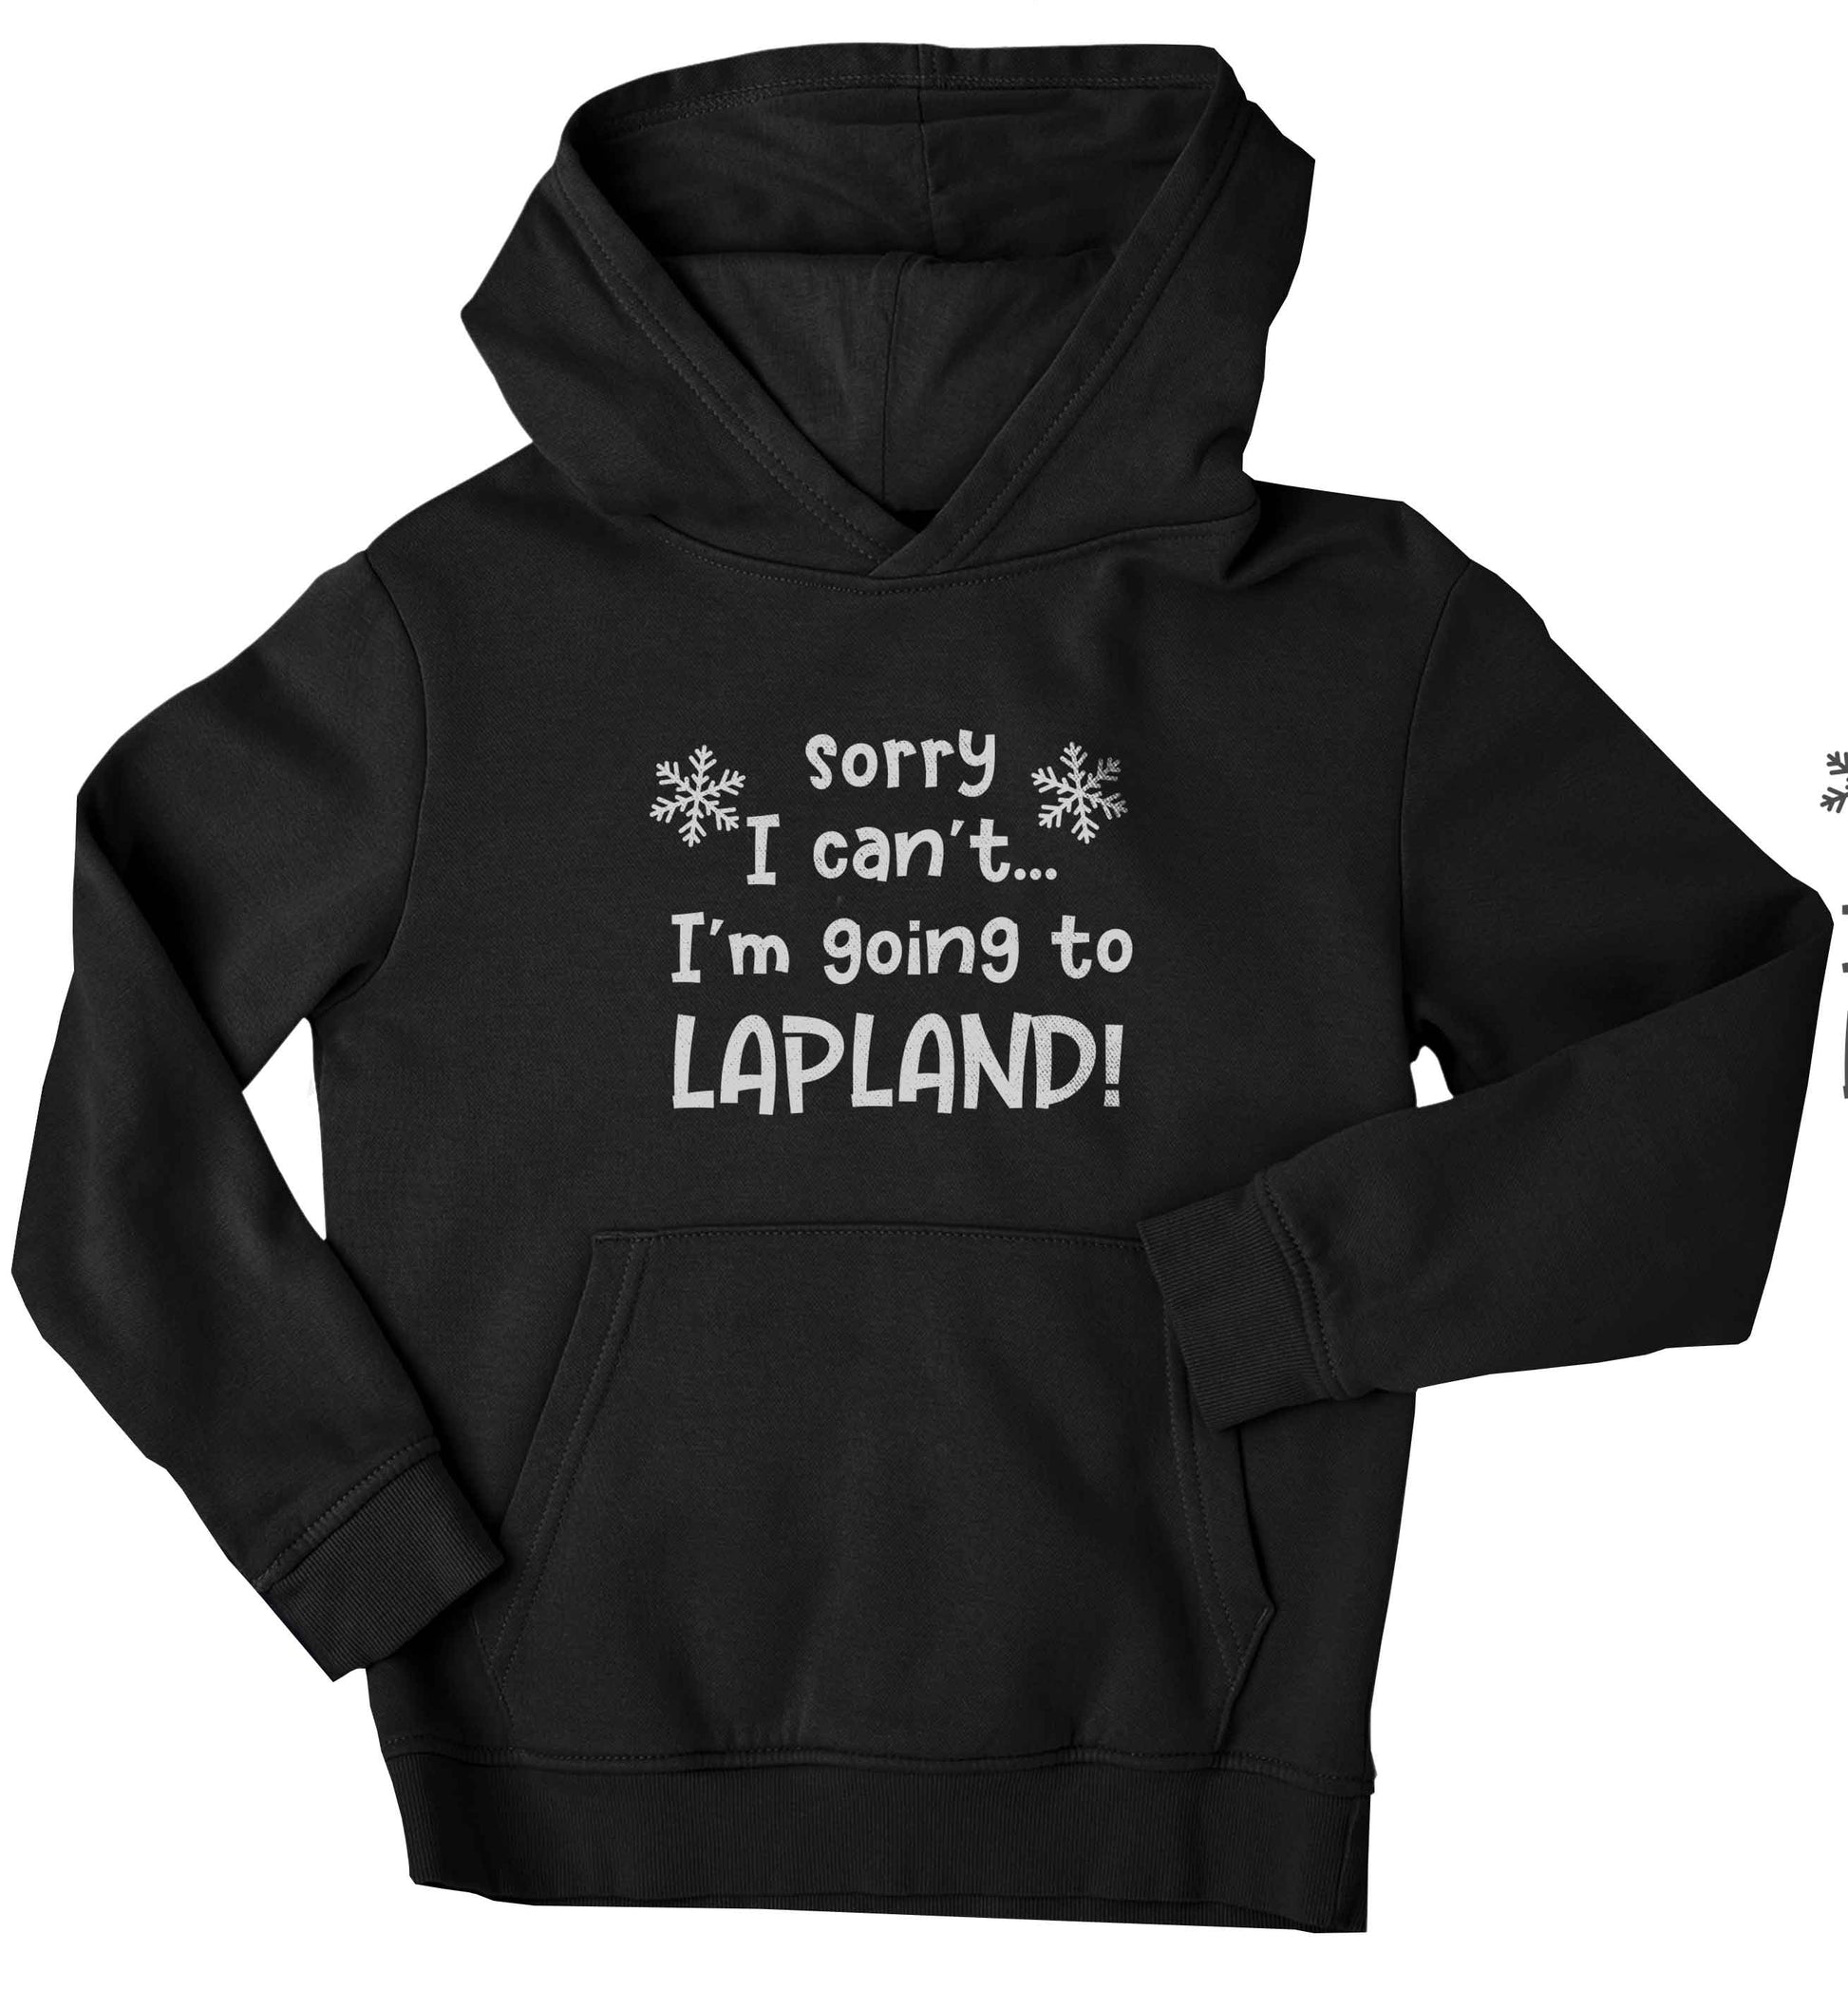 Sorry I can't I'm going to Lapland children's black hoodie 12-13 Years